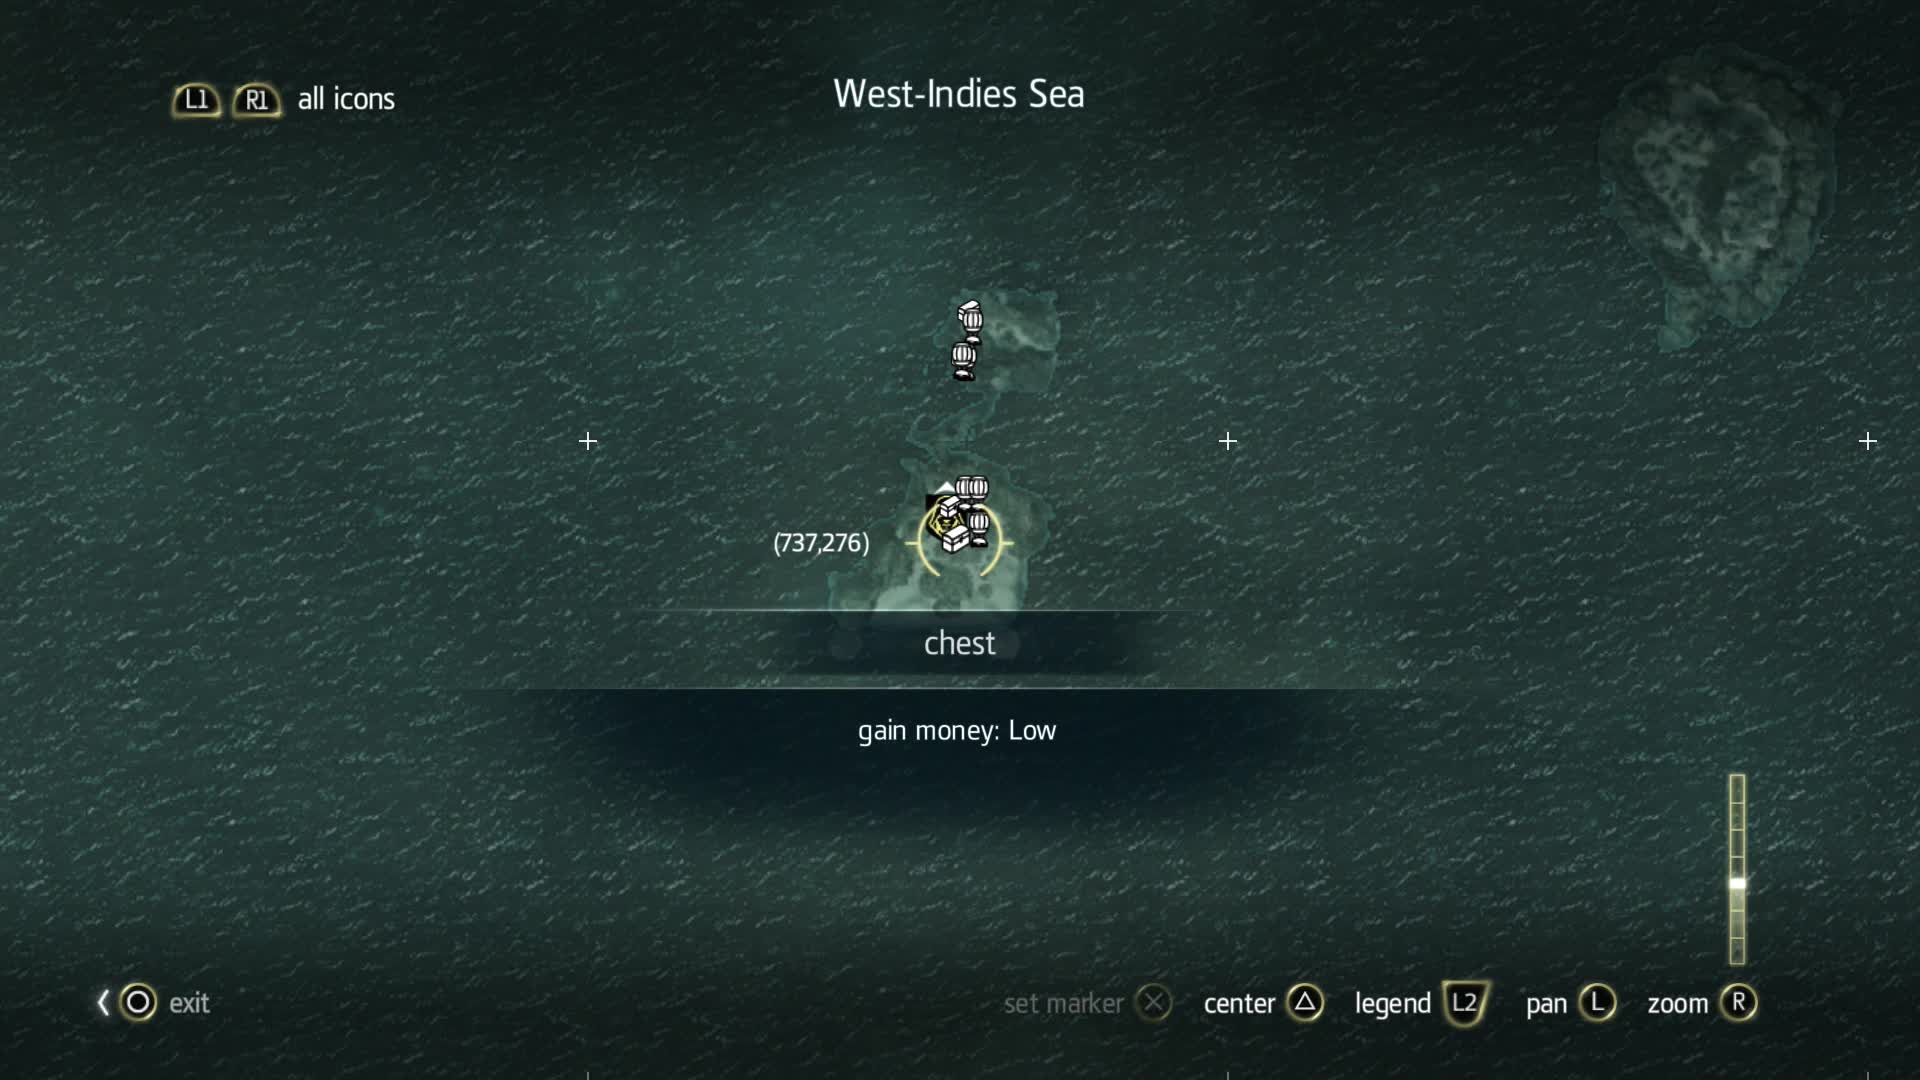 All treasure locations. The wreck is quite small but make sure to set waypoints to each chest to help you find it.